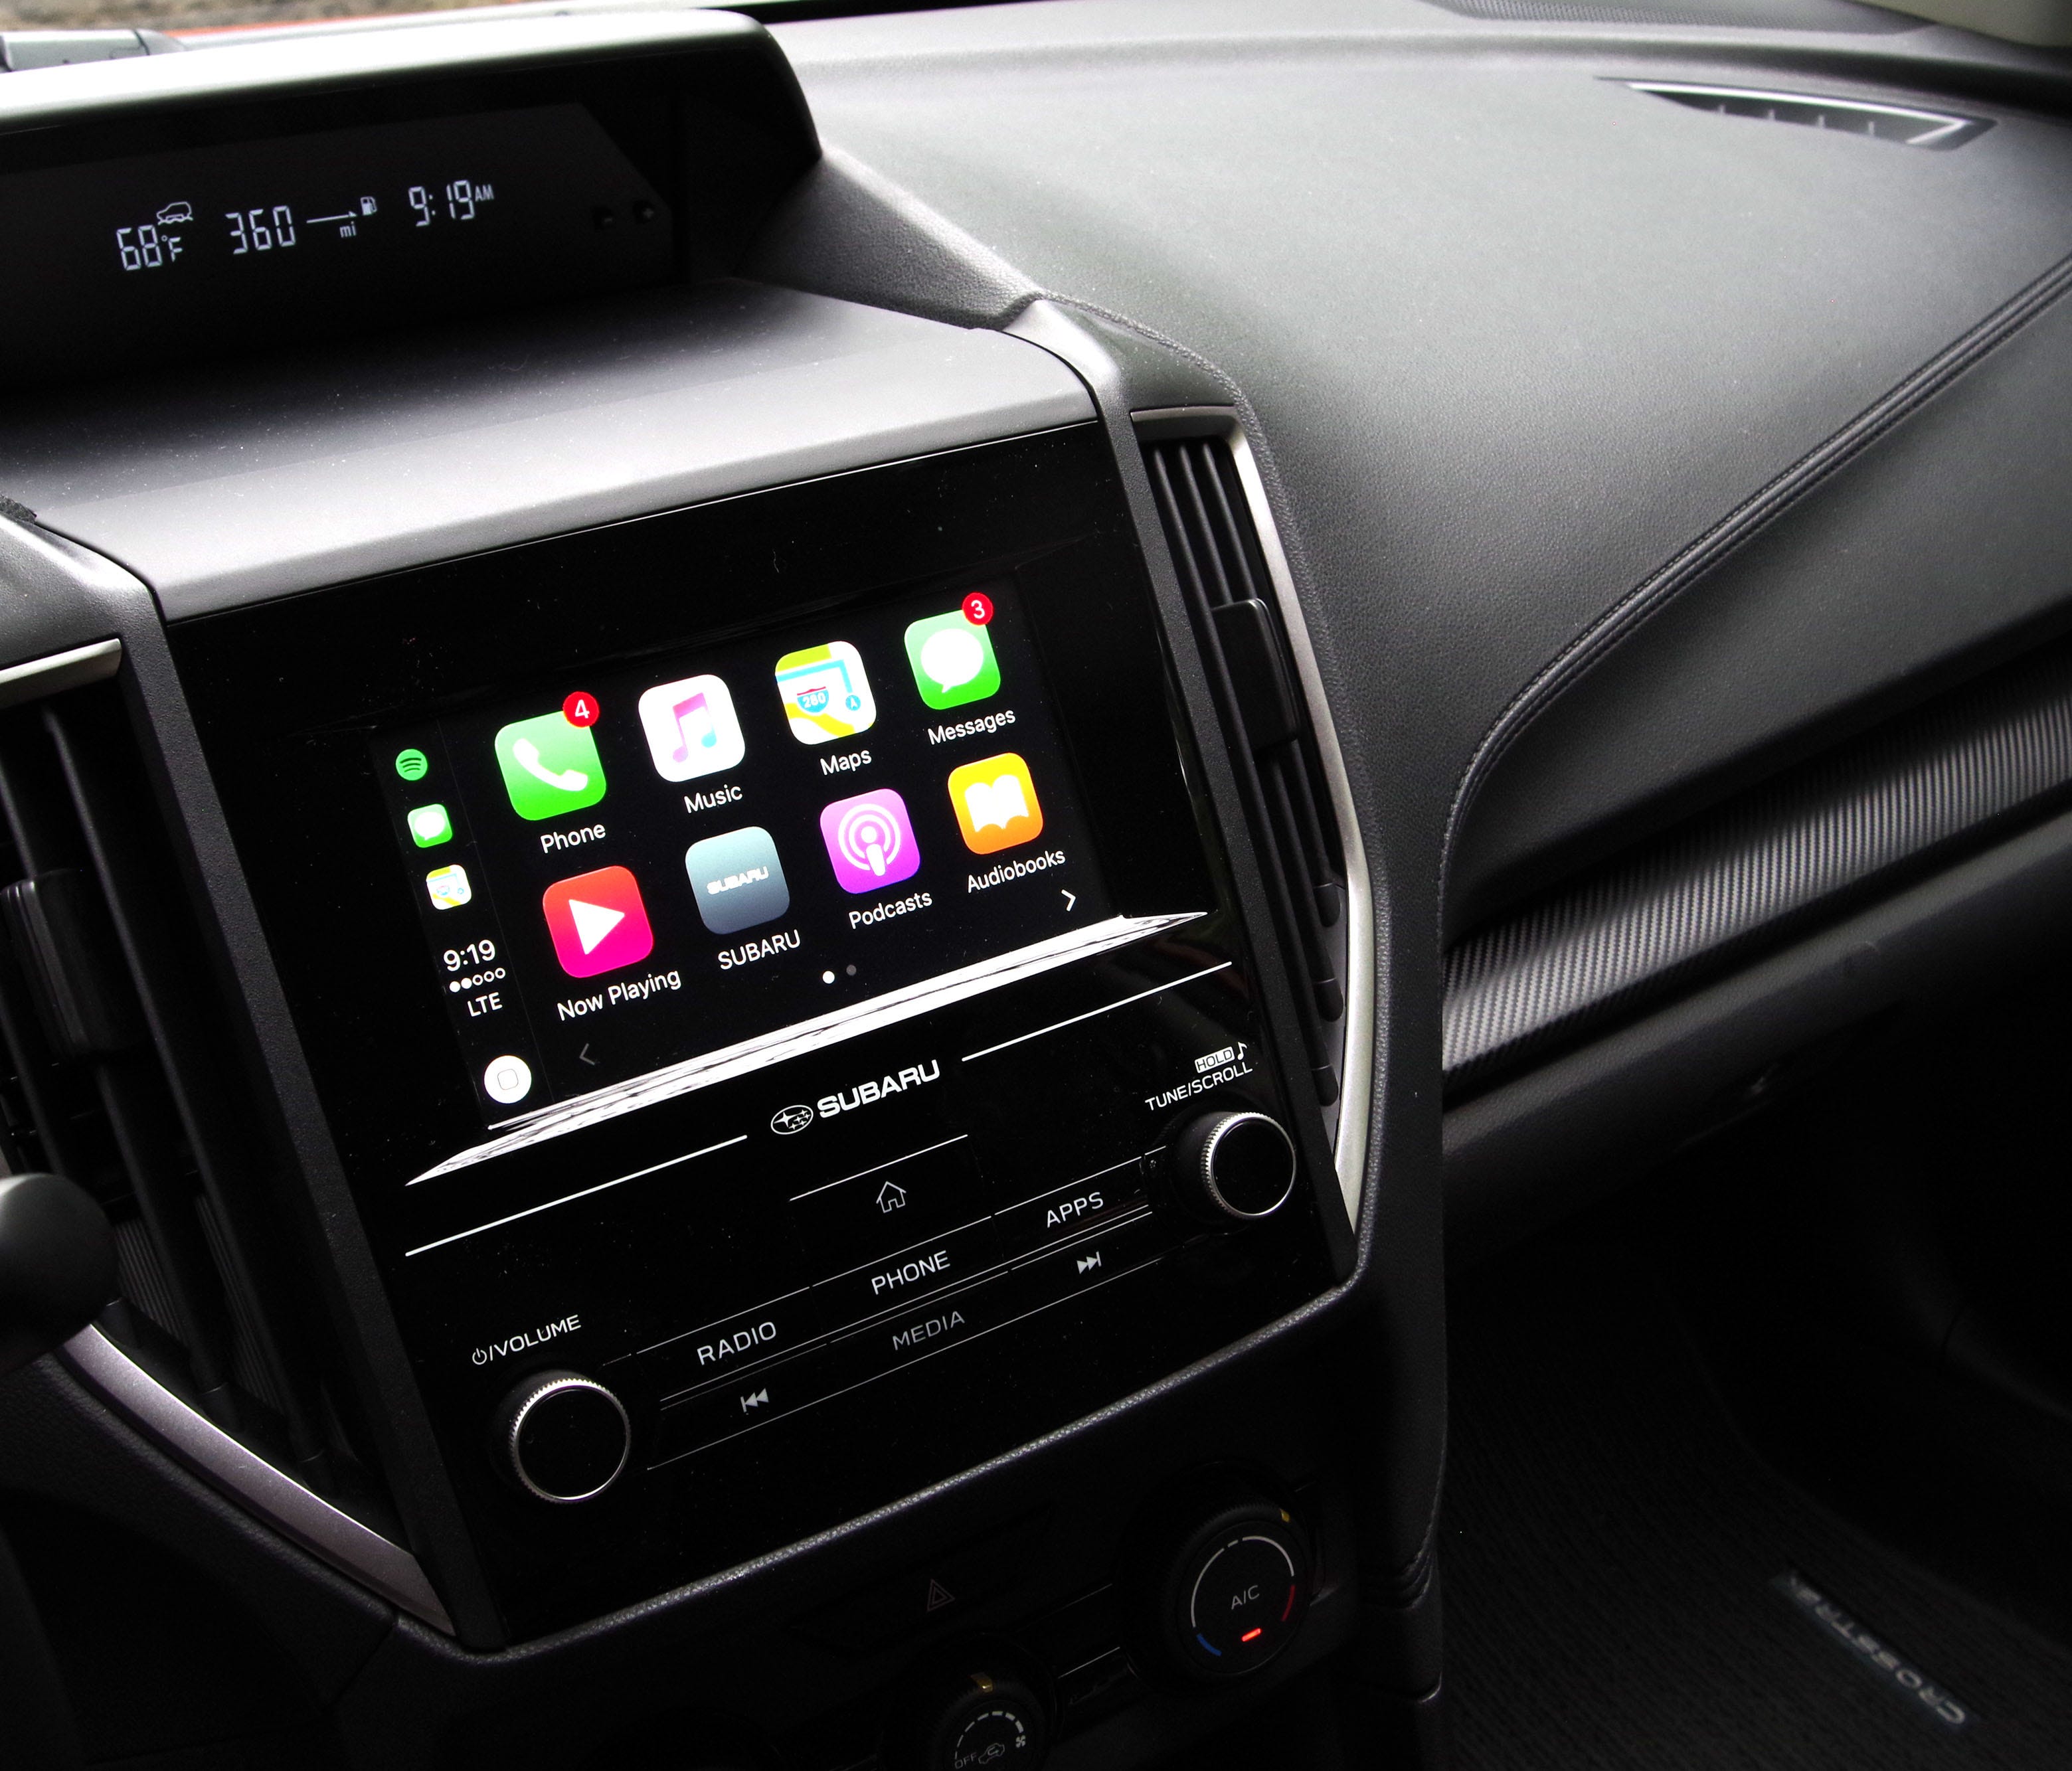 Apple CarPlay and Android Auto both come standard on the 2018 Crosstrek